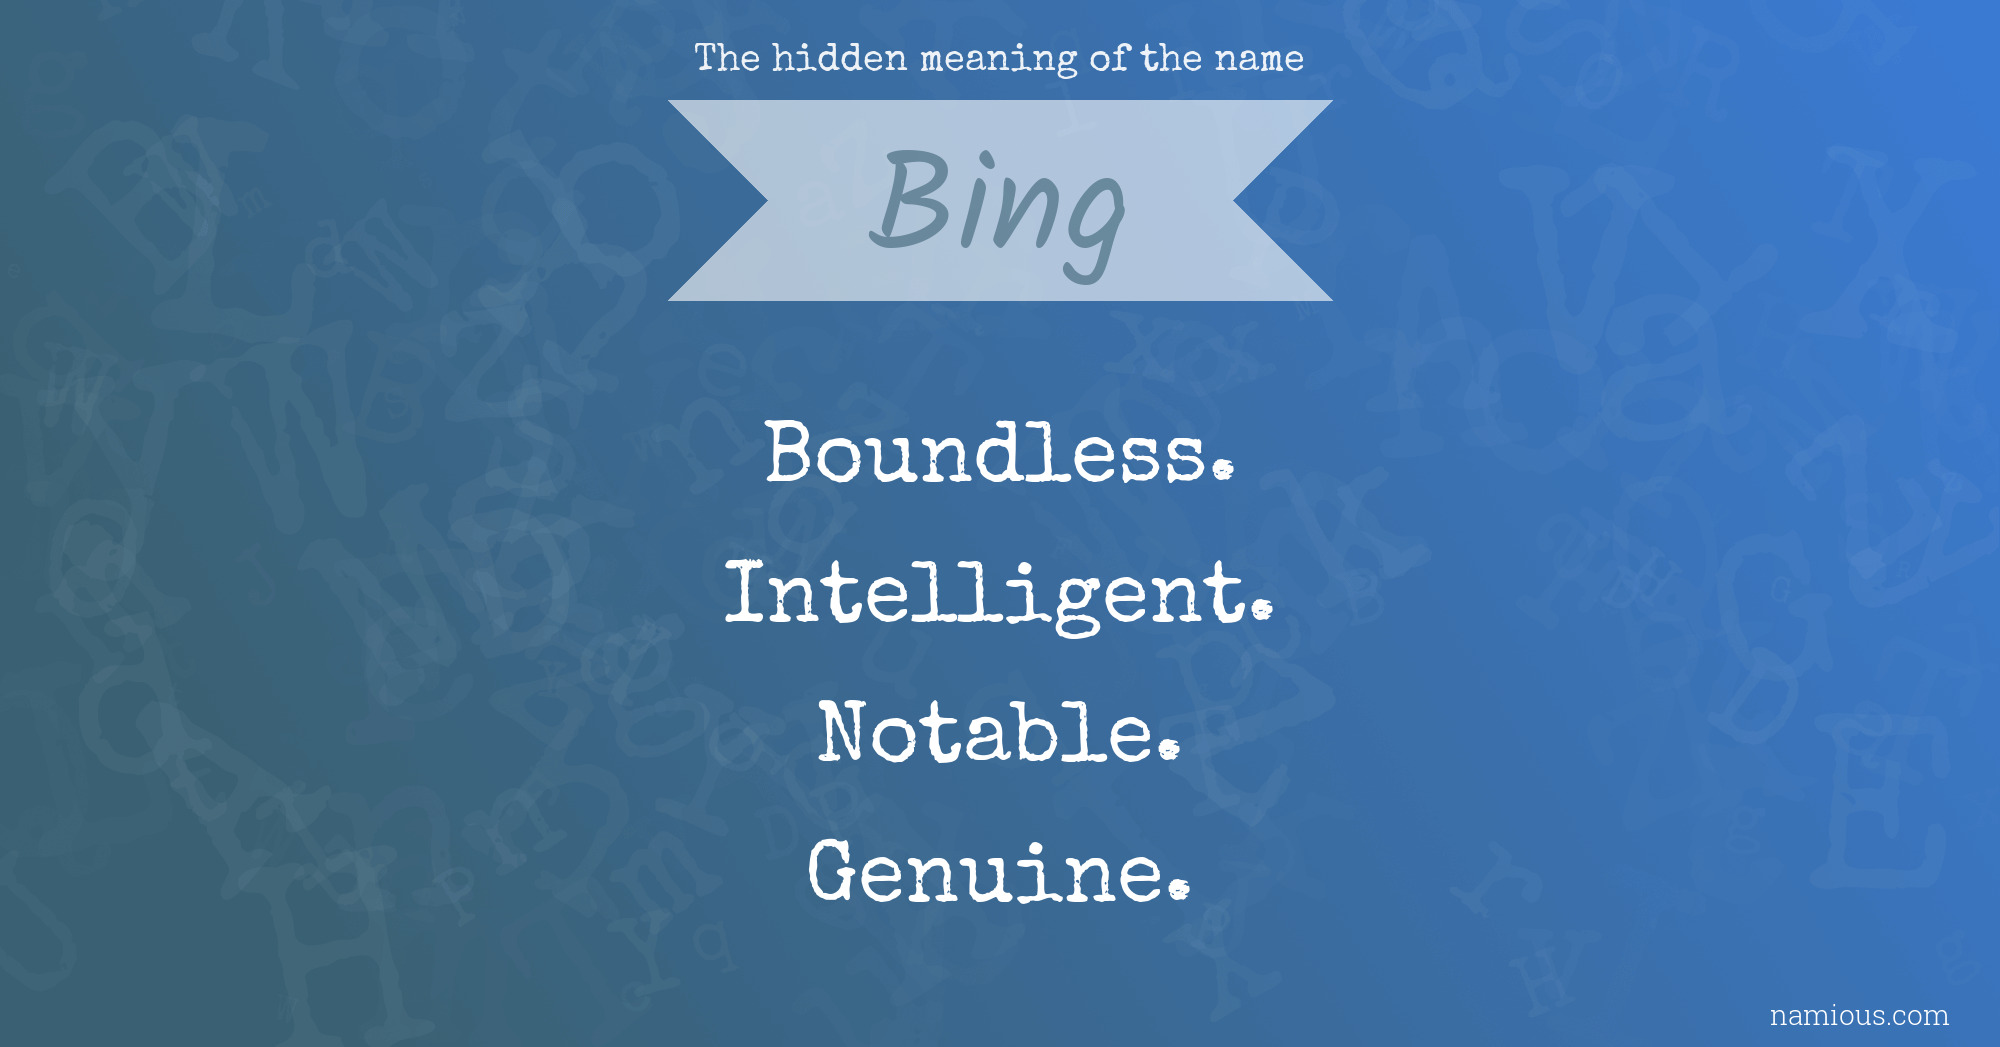 The hidden meaning of the name Bing